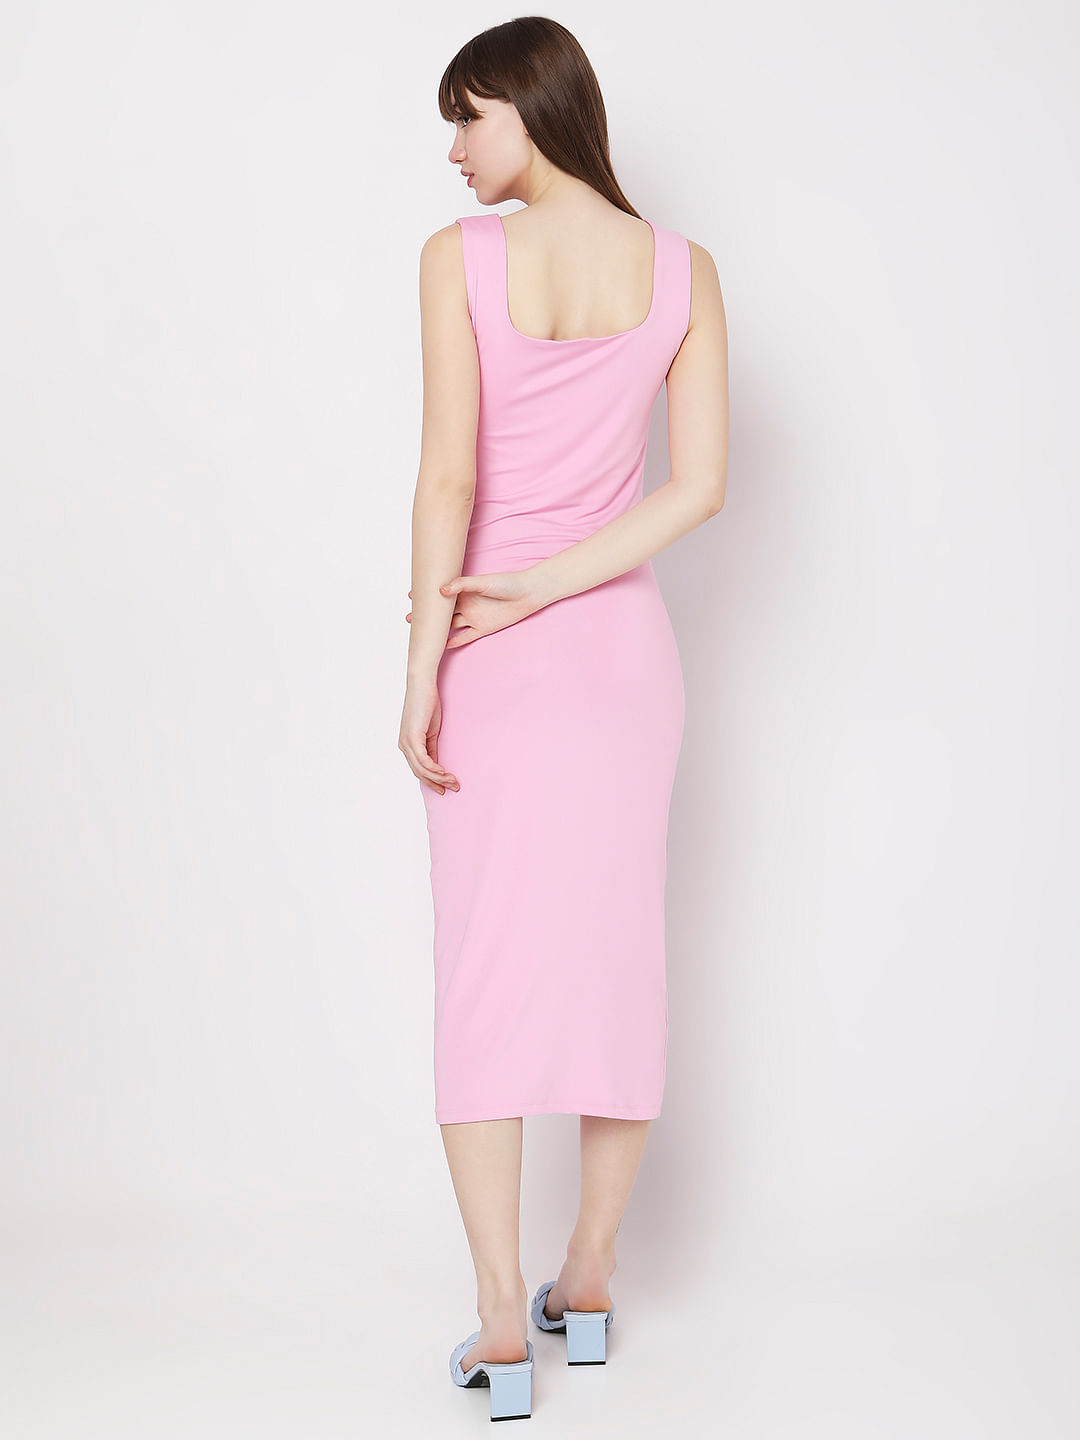 Bodycon Dresses: Fitted, Tight & More | Women | Forever 21